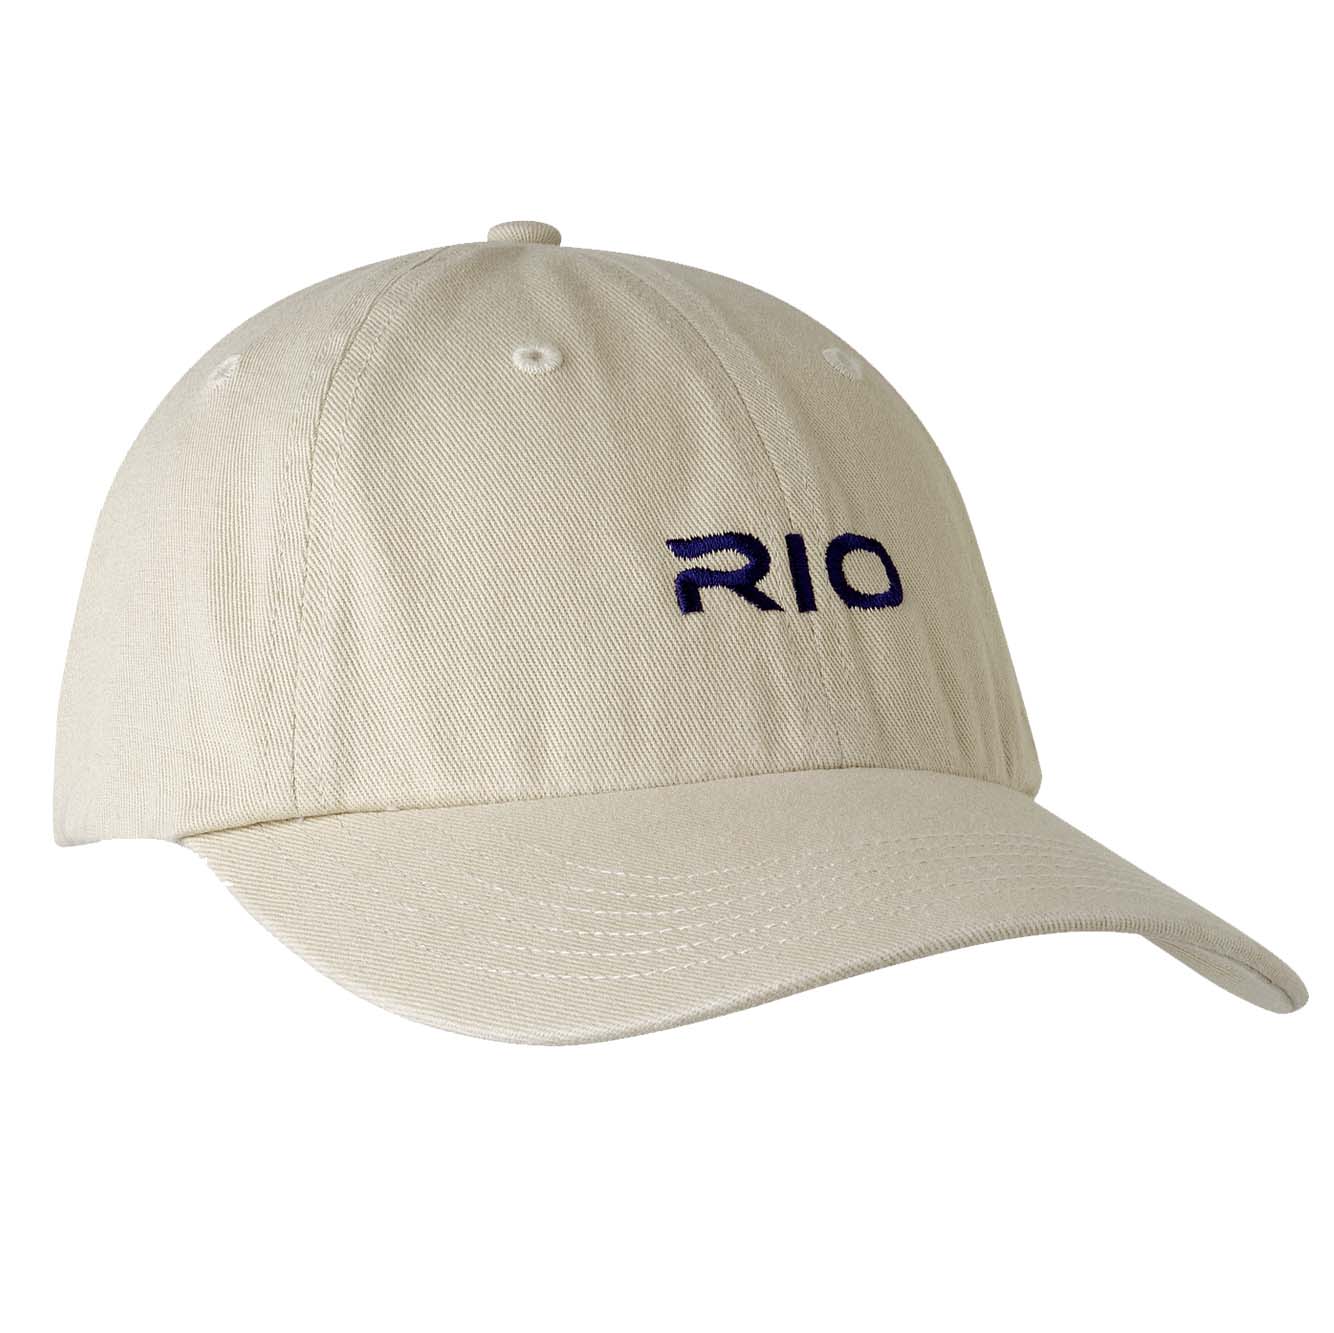 RIO Relaxed Logo Hat – Guide Flyfishing, Fly Fishing Rods, Reels, Sage, Redington, RIO